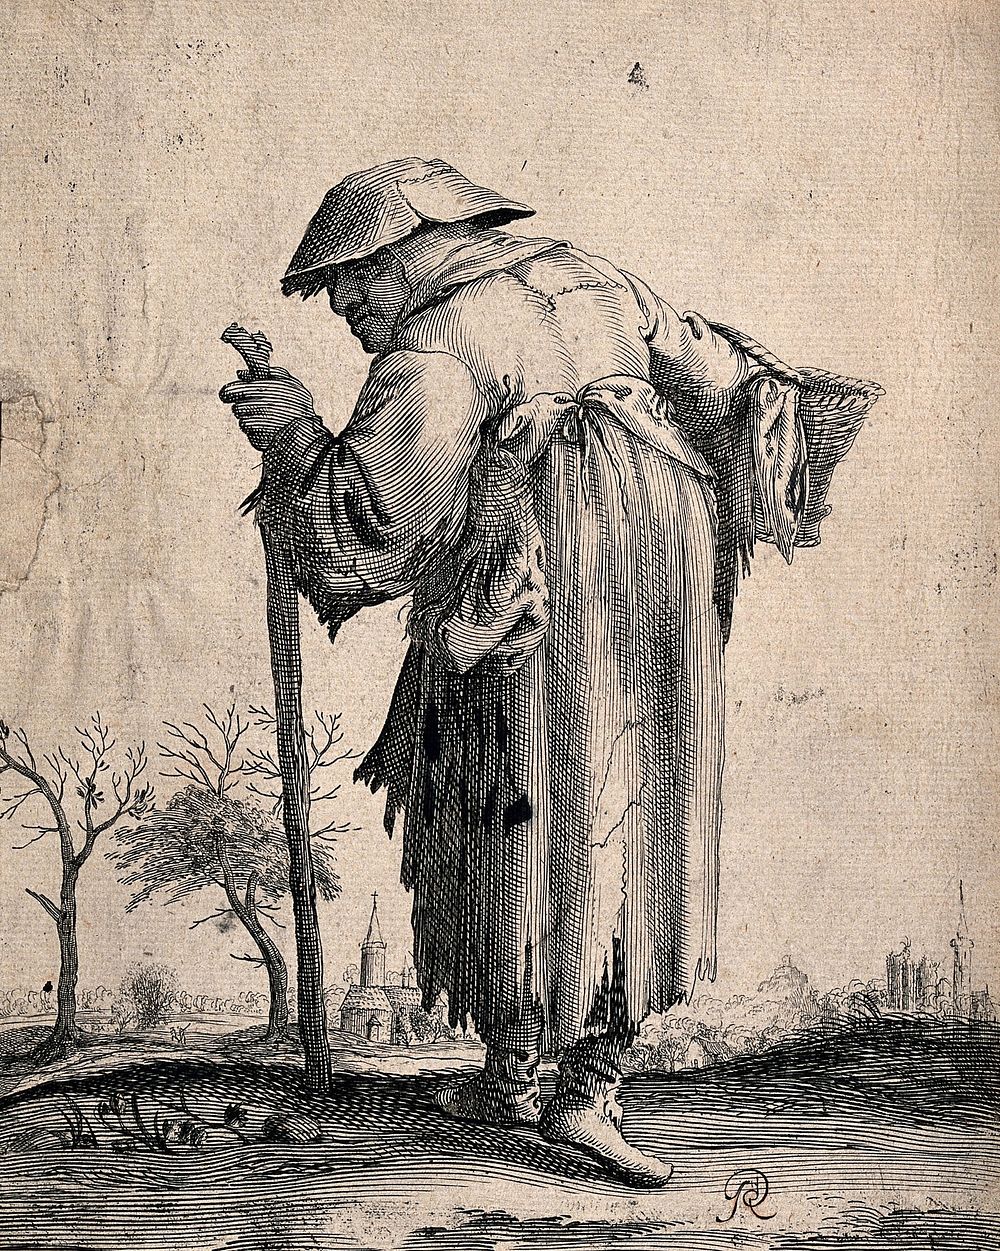 An old beggar-man leaning on a stick and carrying a basket is walking towards a town in the distance. Etching.